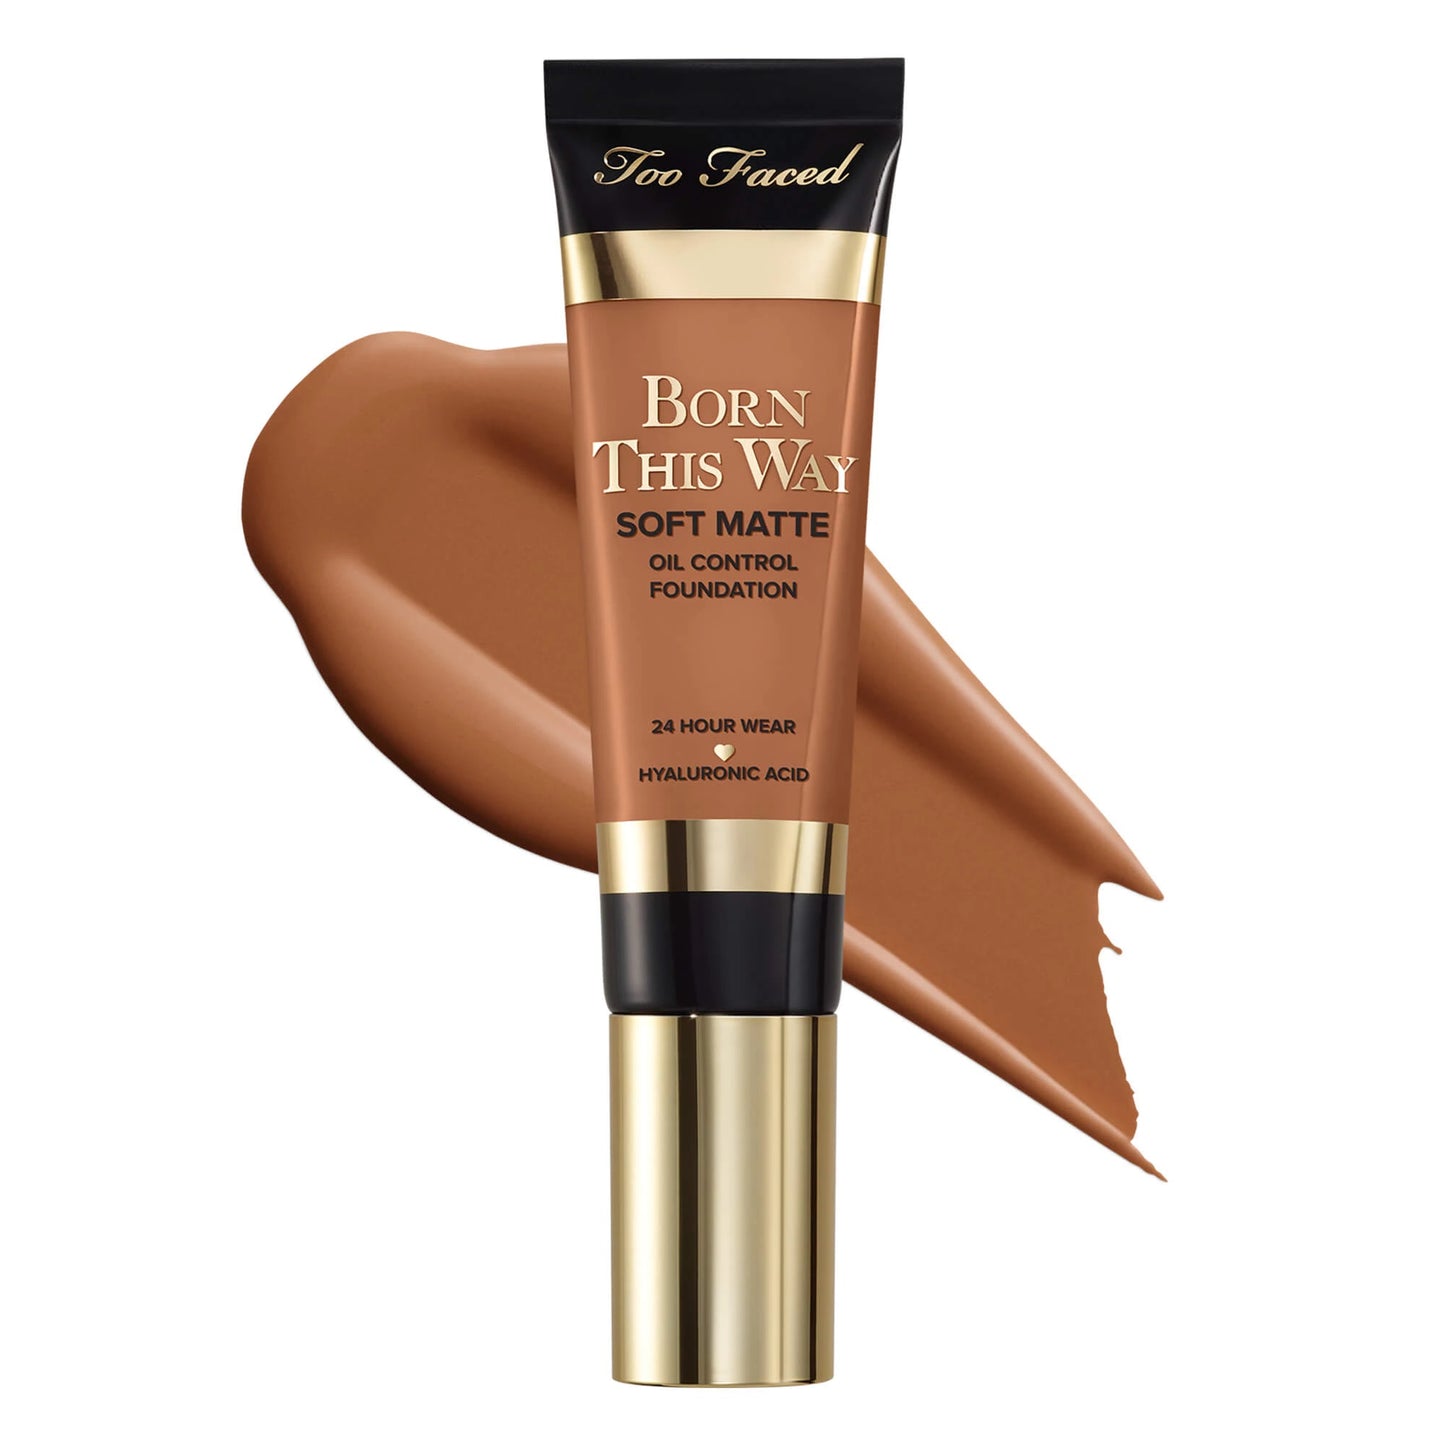 Too Faced Born This Way Soft Matte Foundation 30ml - Honey